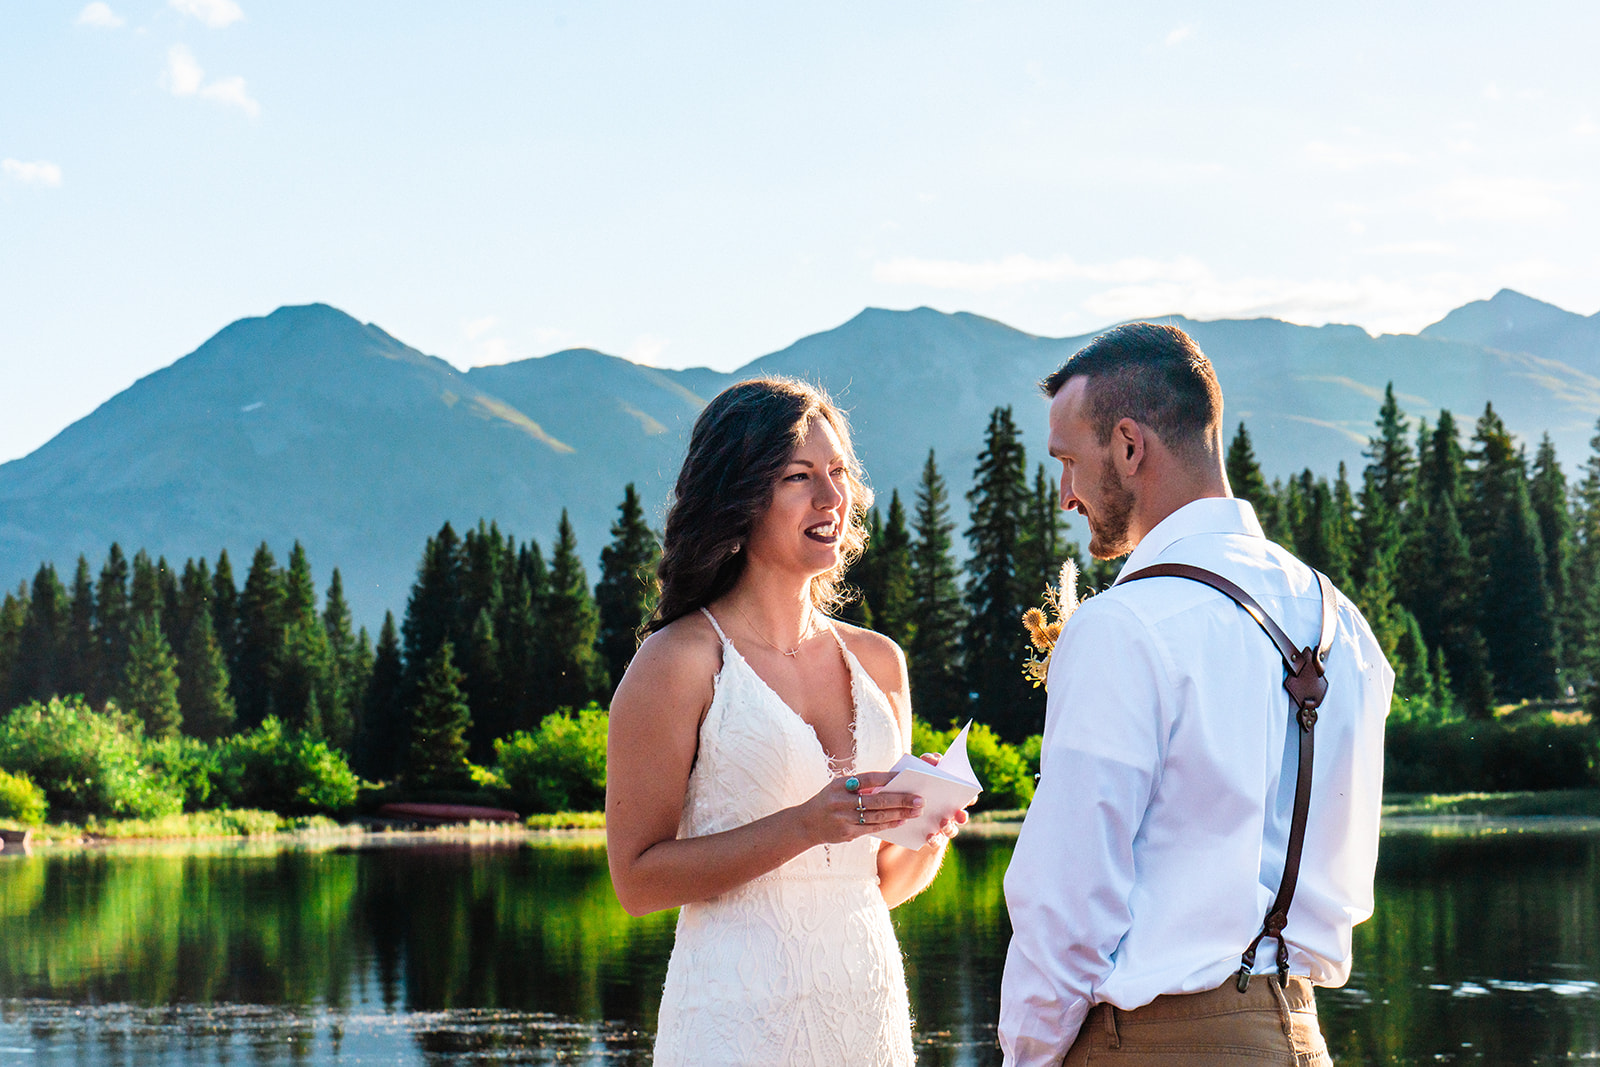 Bride and groom exchanging vows at a shoreline in the San Juan Mountains